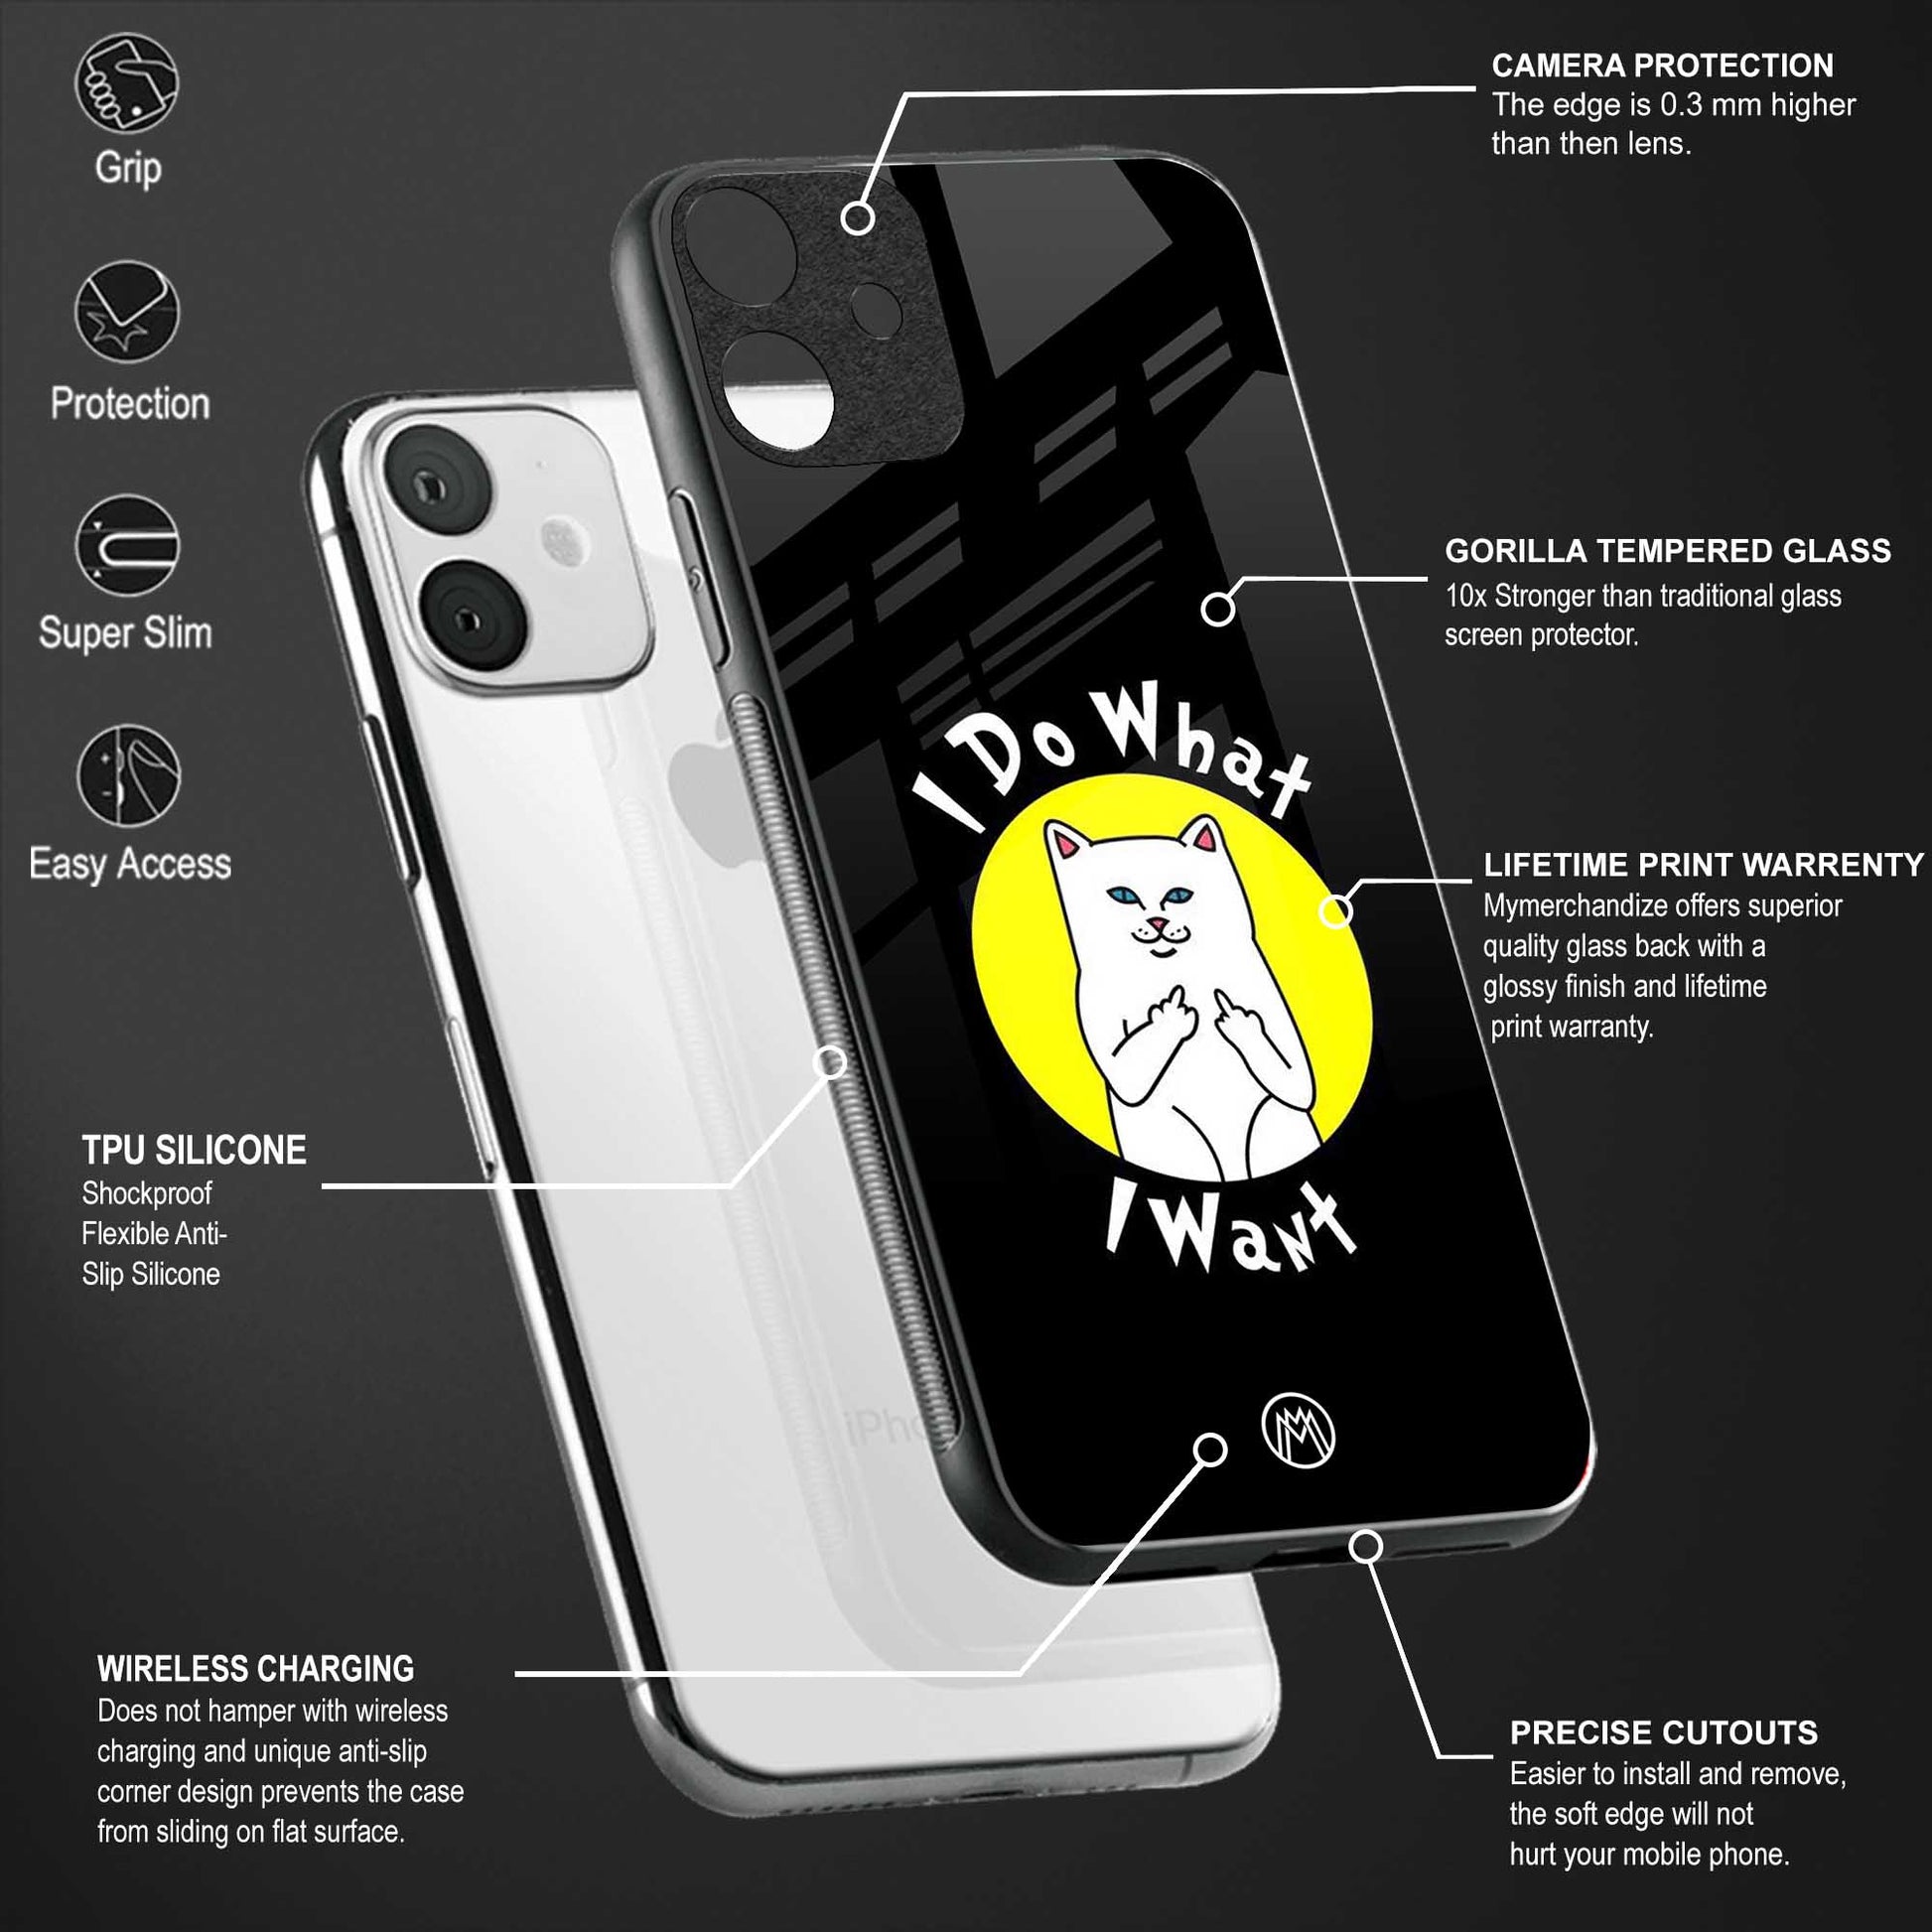 i do what i want glass case for samsung galaxy m30s